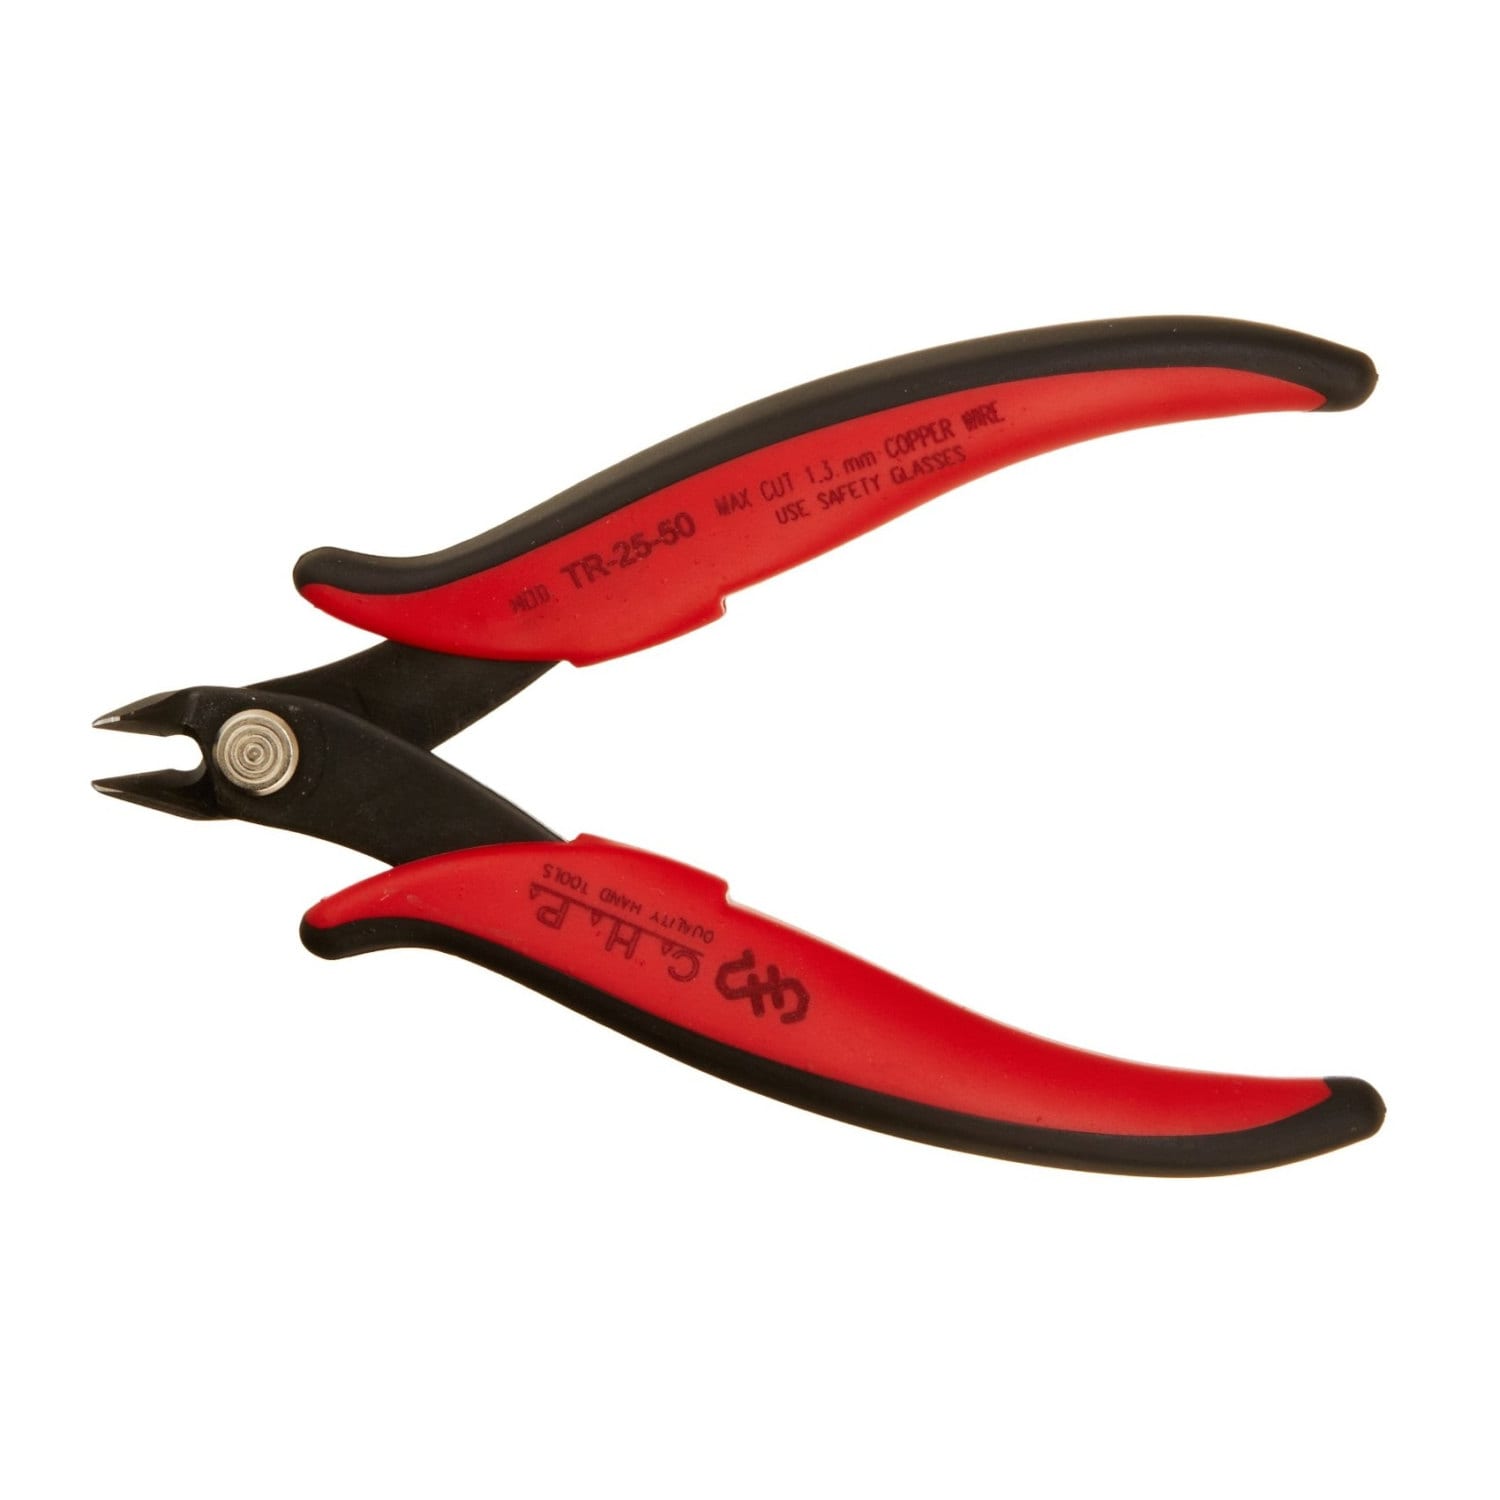 Fish Bone Pliers/Tweezers Curved, High Grade Stainless Steel Polished (14cm)